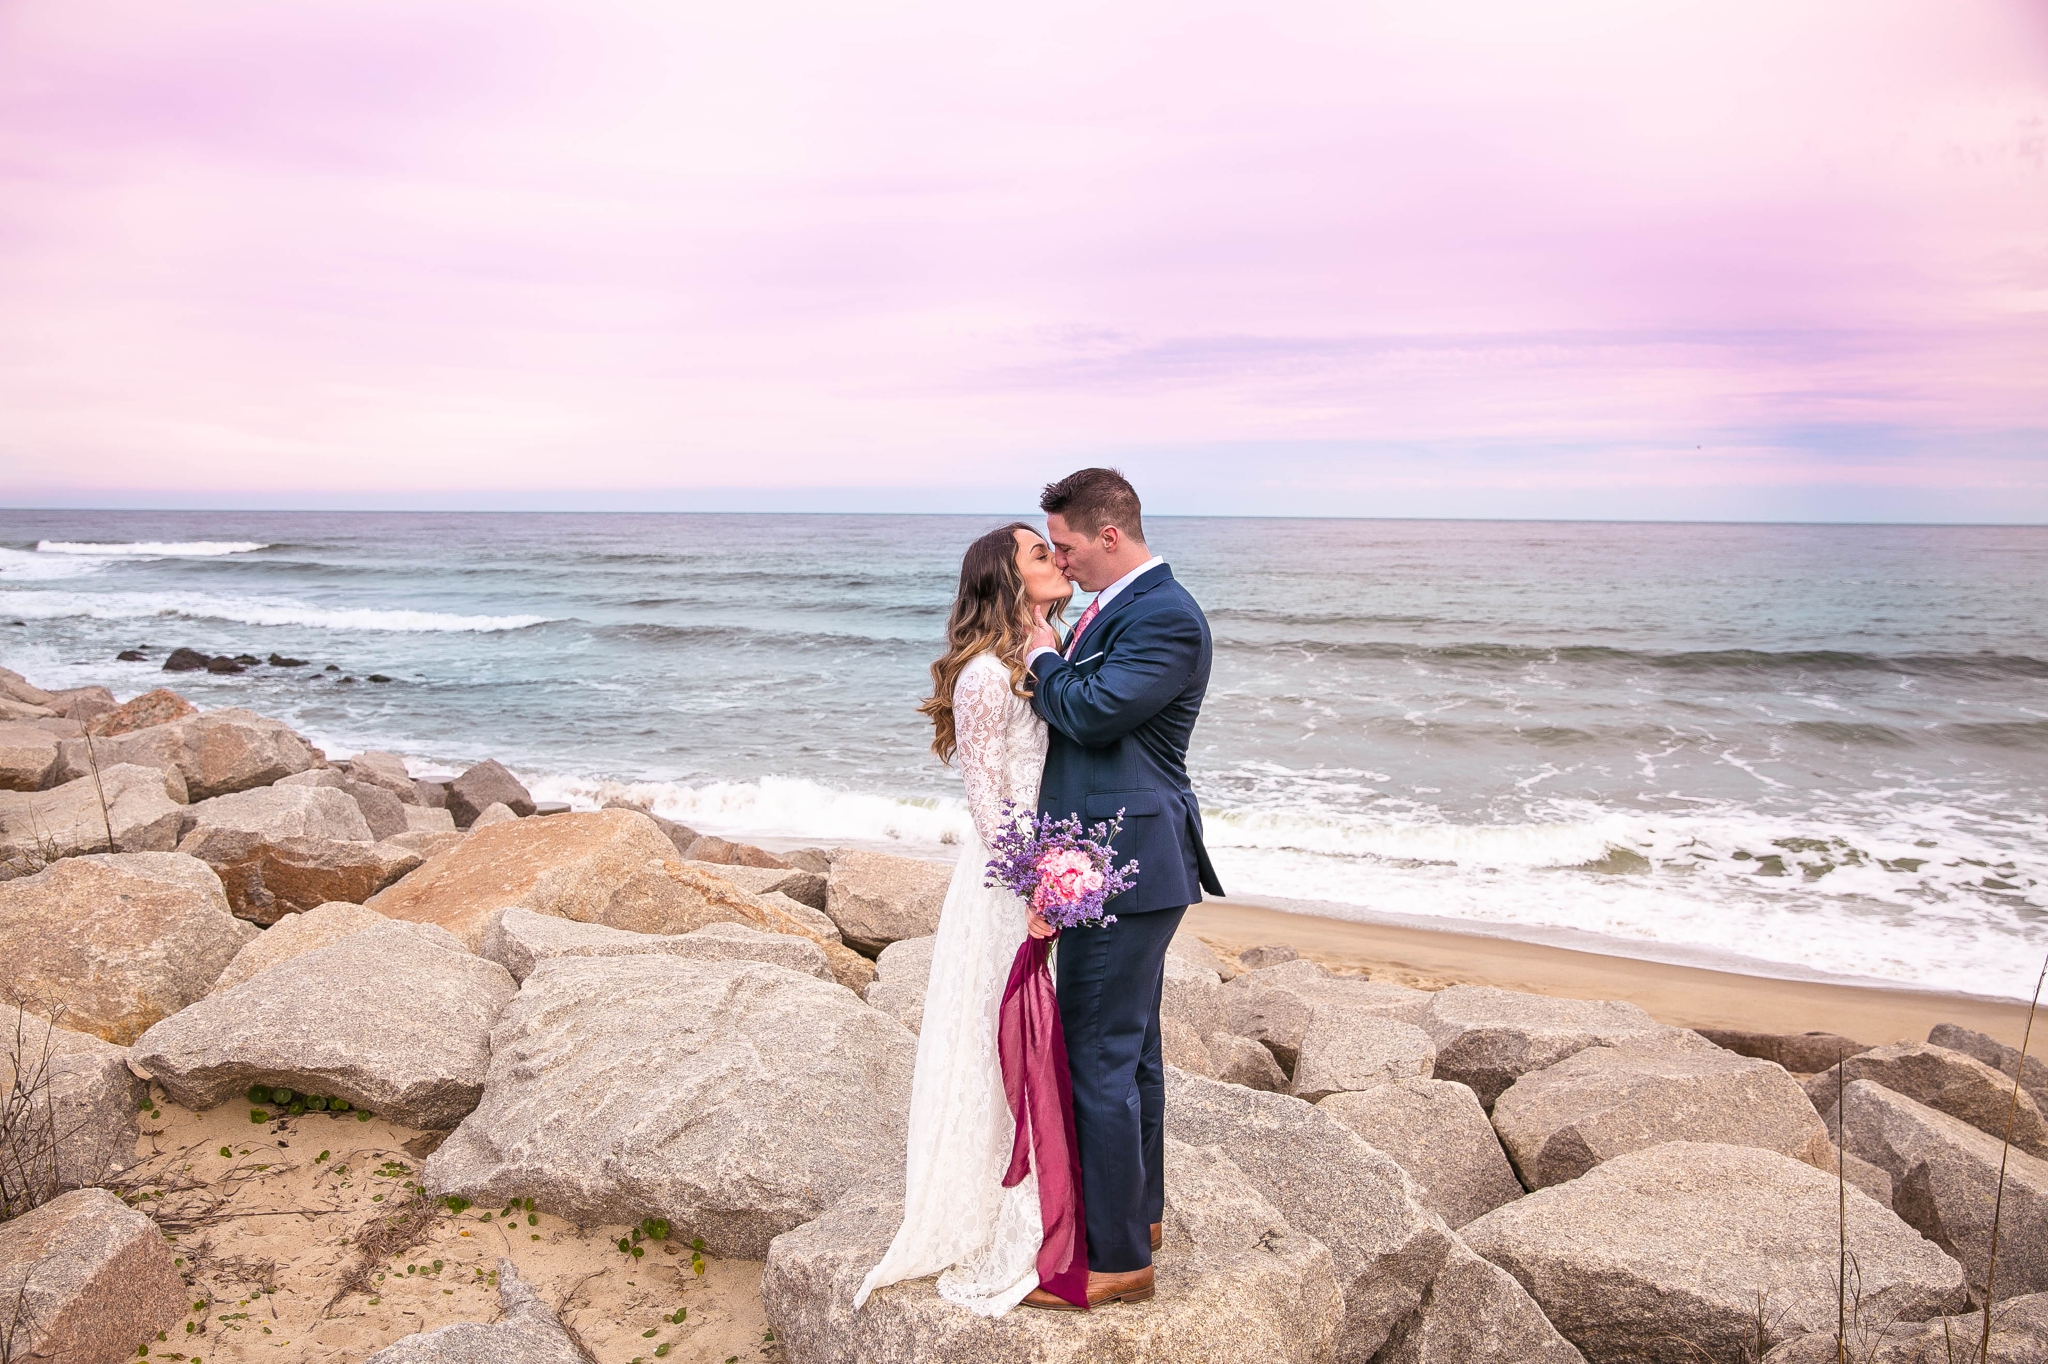 Cotton Candy Sky Beach Elopement Portraits - Bride and Groom on top of the Cliffs - - dress by asos with purple and pink flowers and navy suit - oahu hawaii wedding photographer